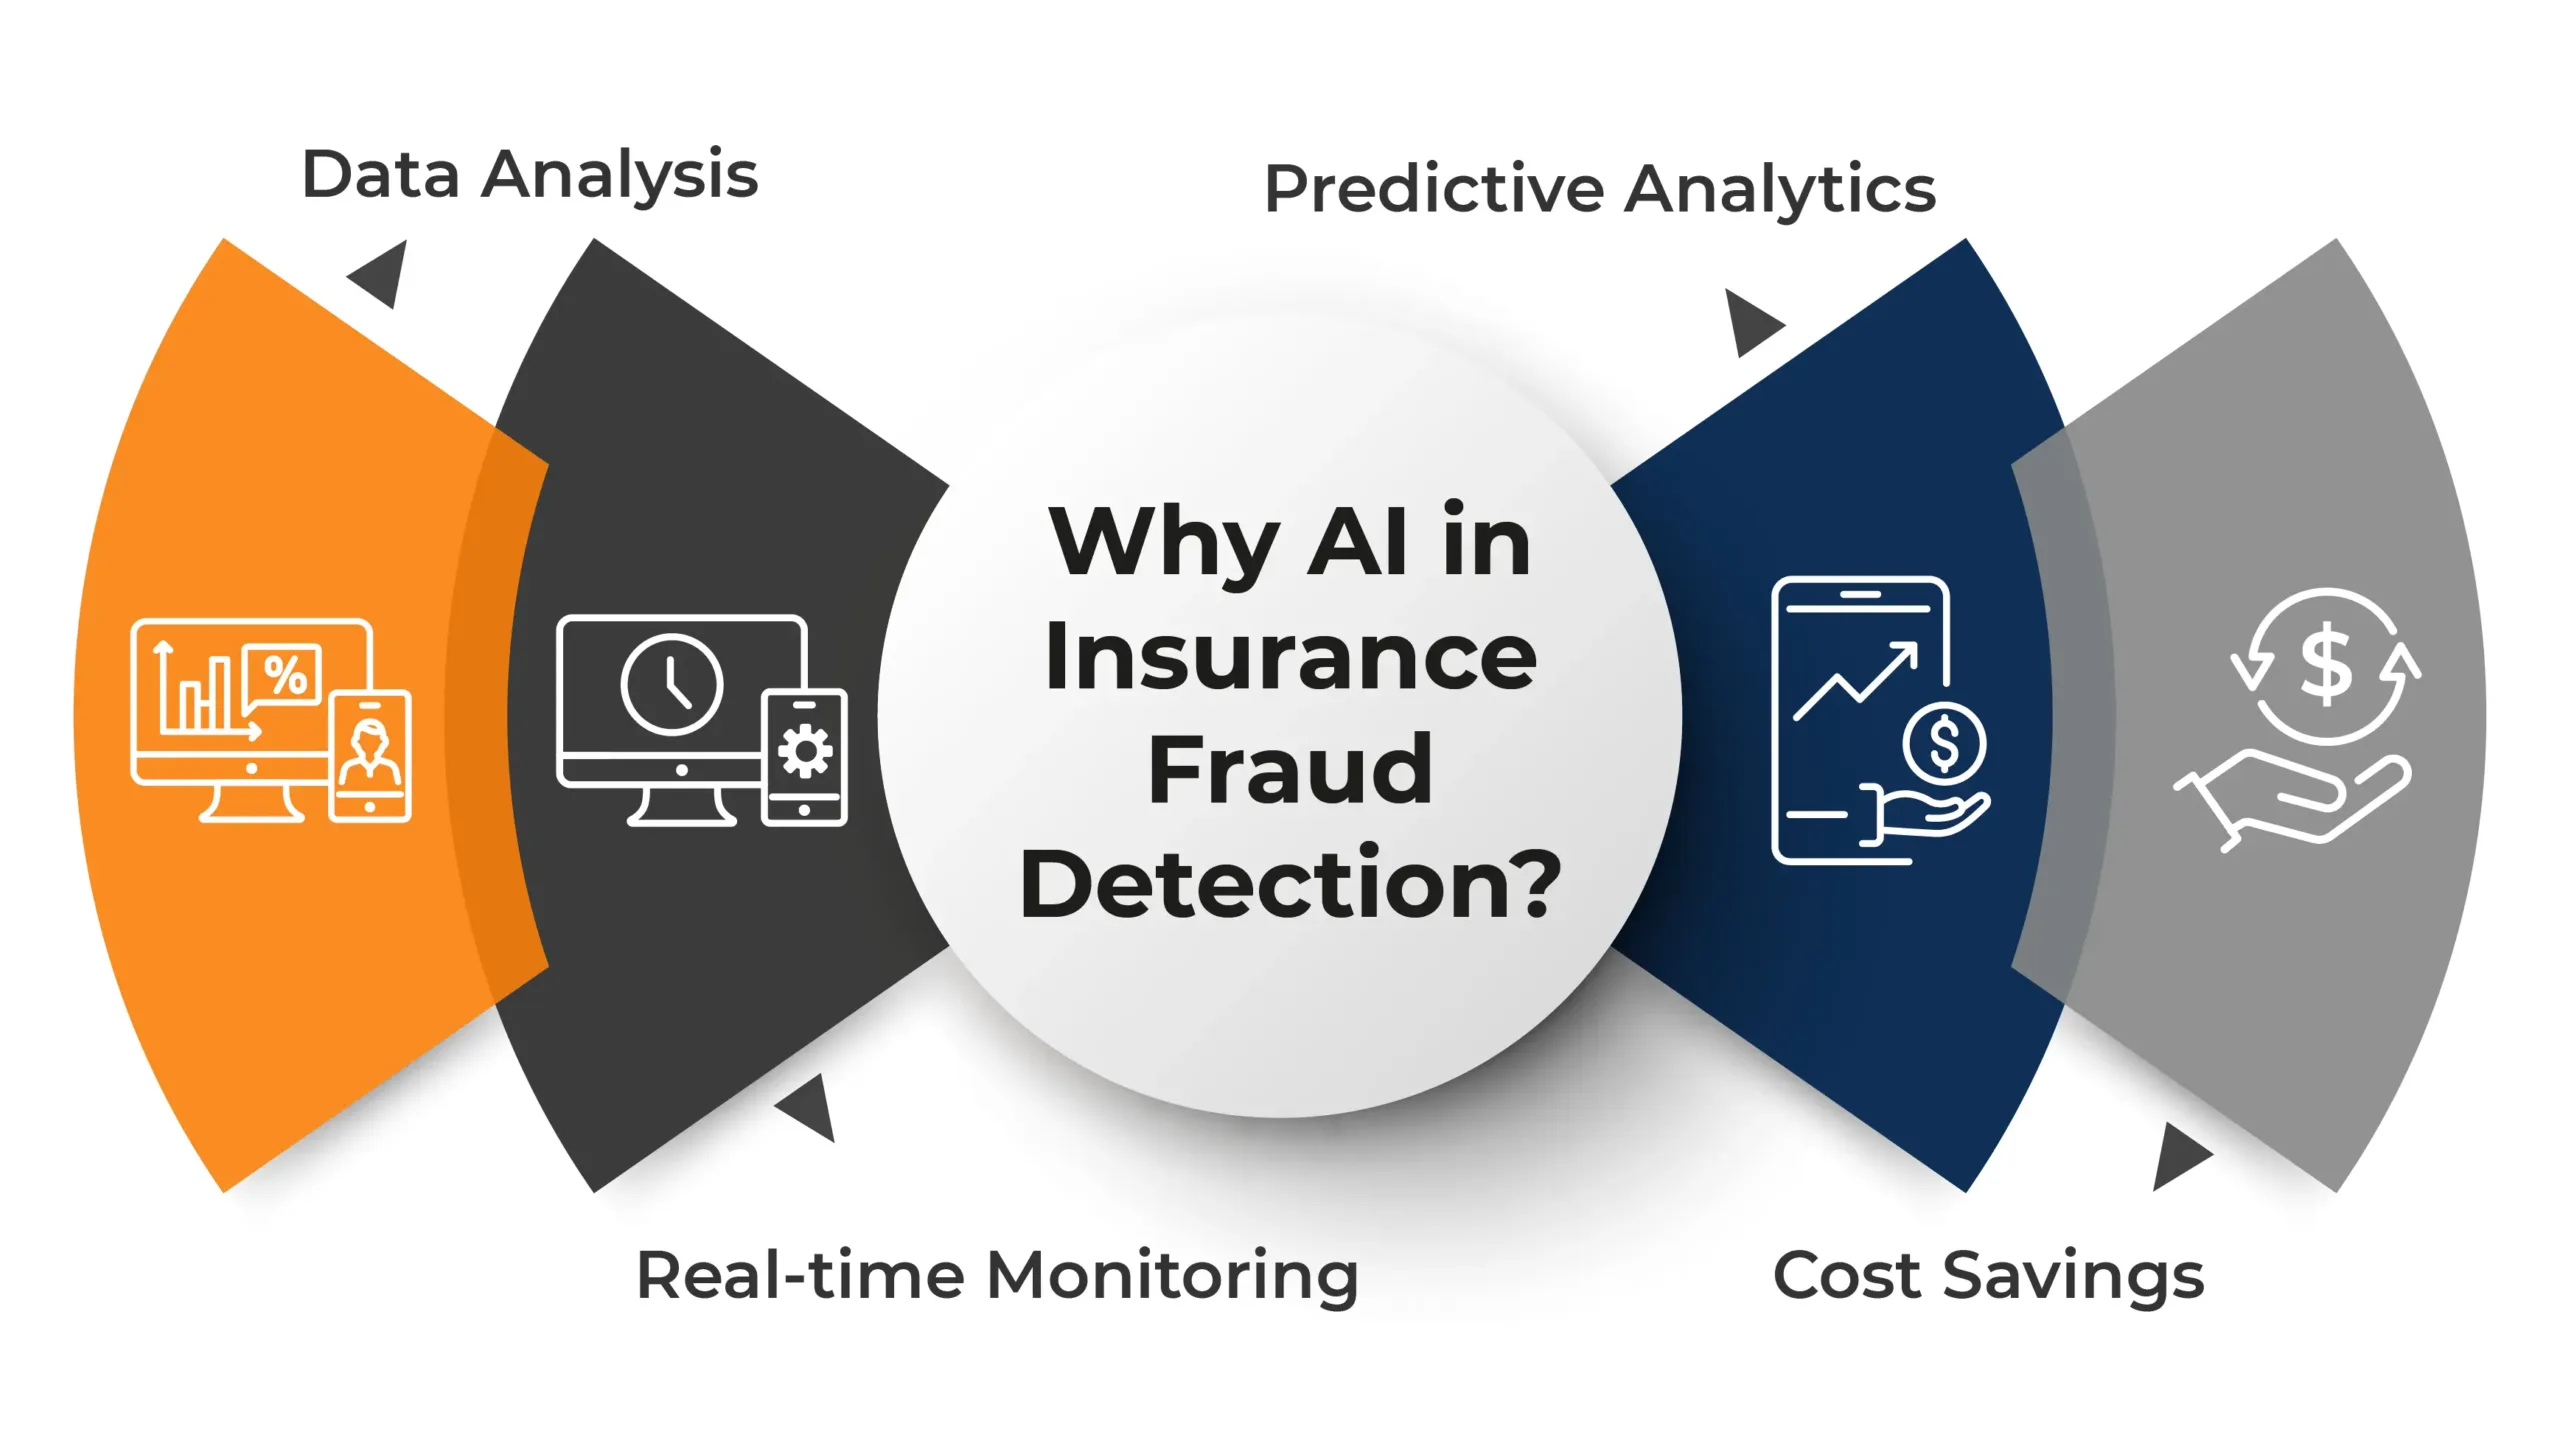 Why AI in Insurance Fraud Detection?